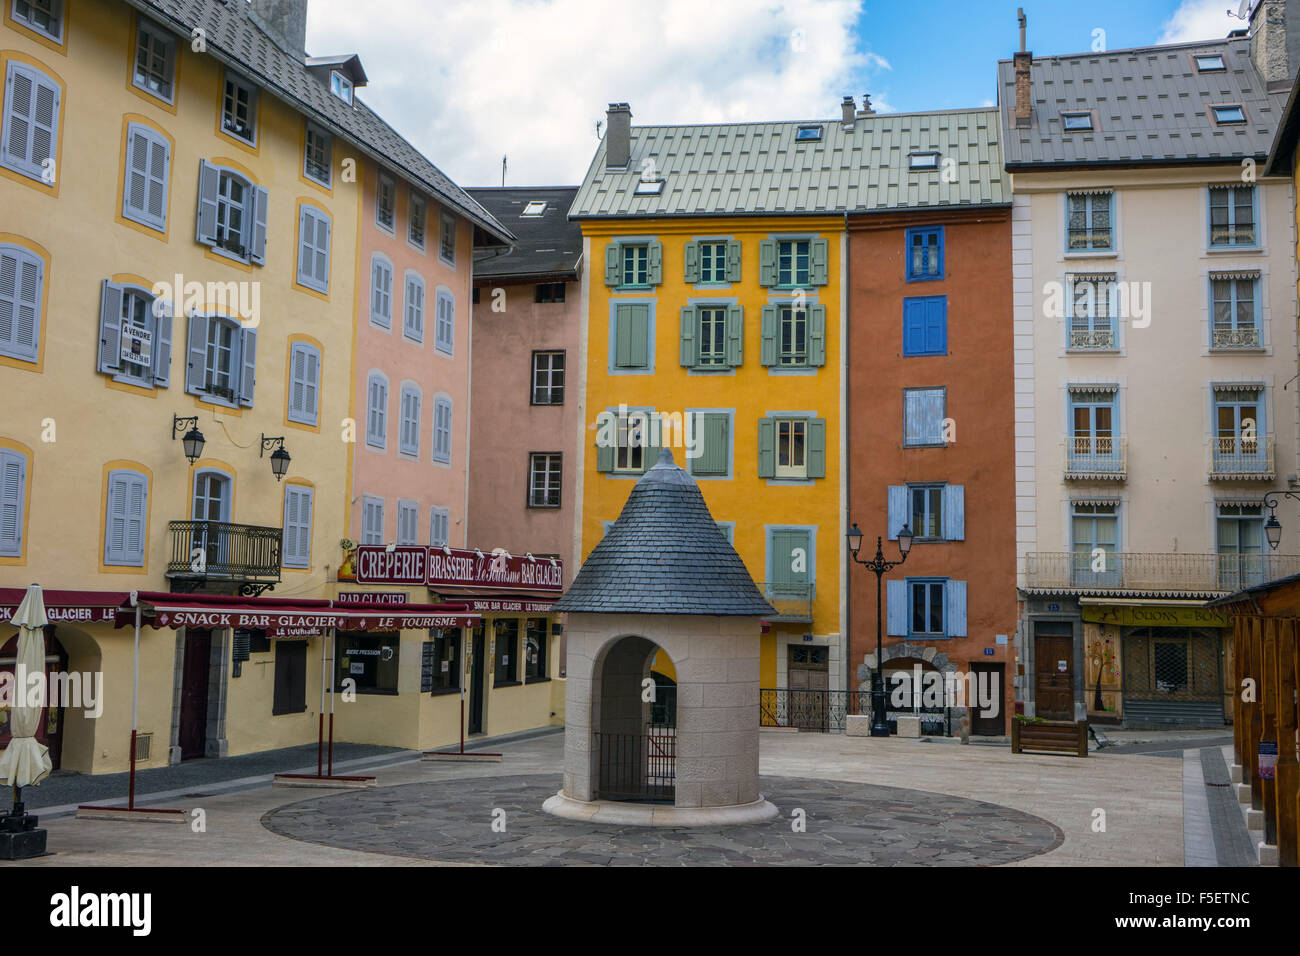 Place des Armes, Briançon fortified city in the mountains, France Stock Photo